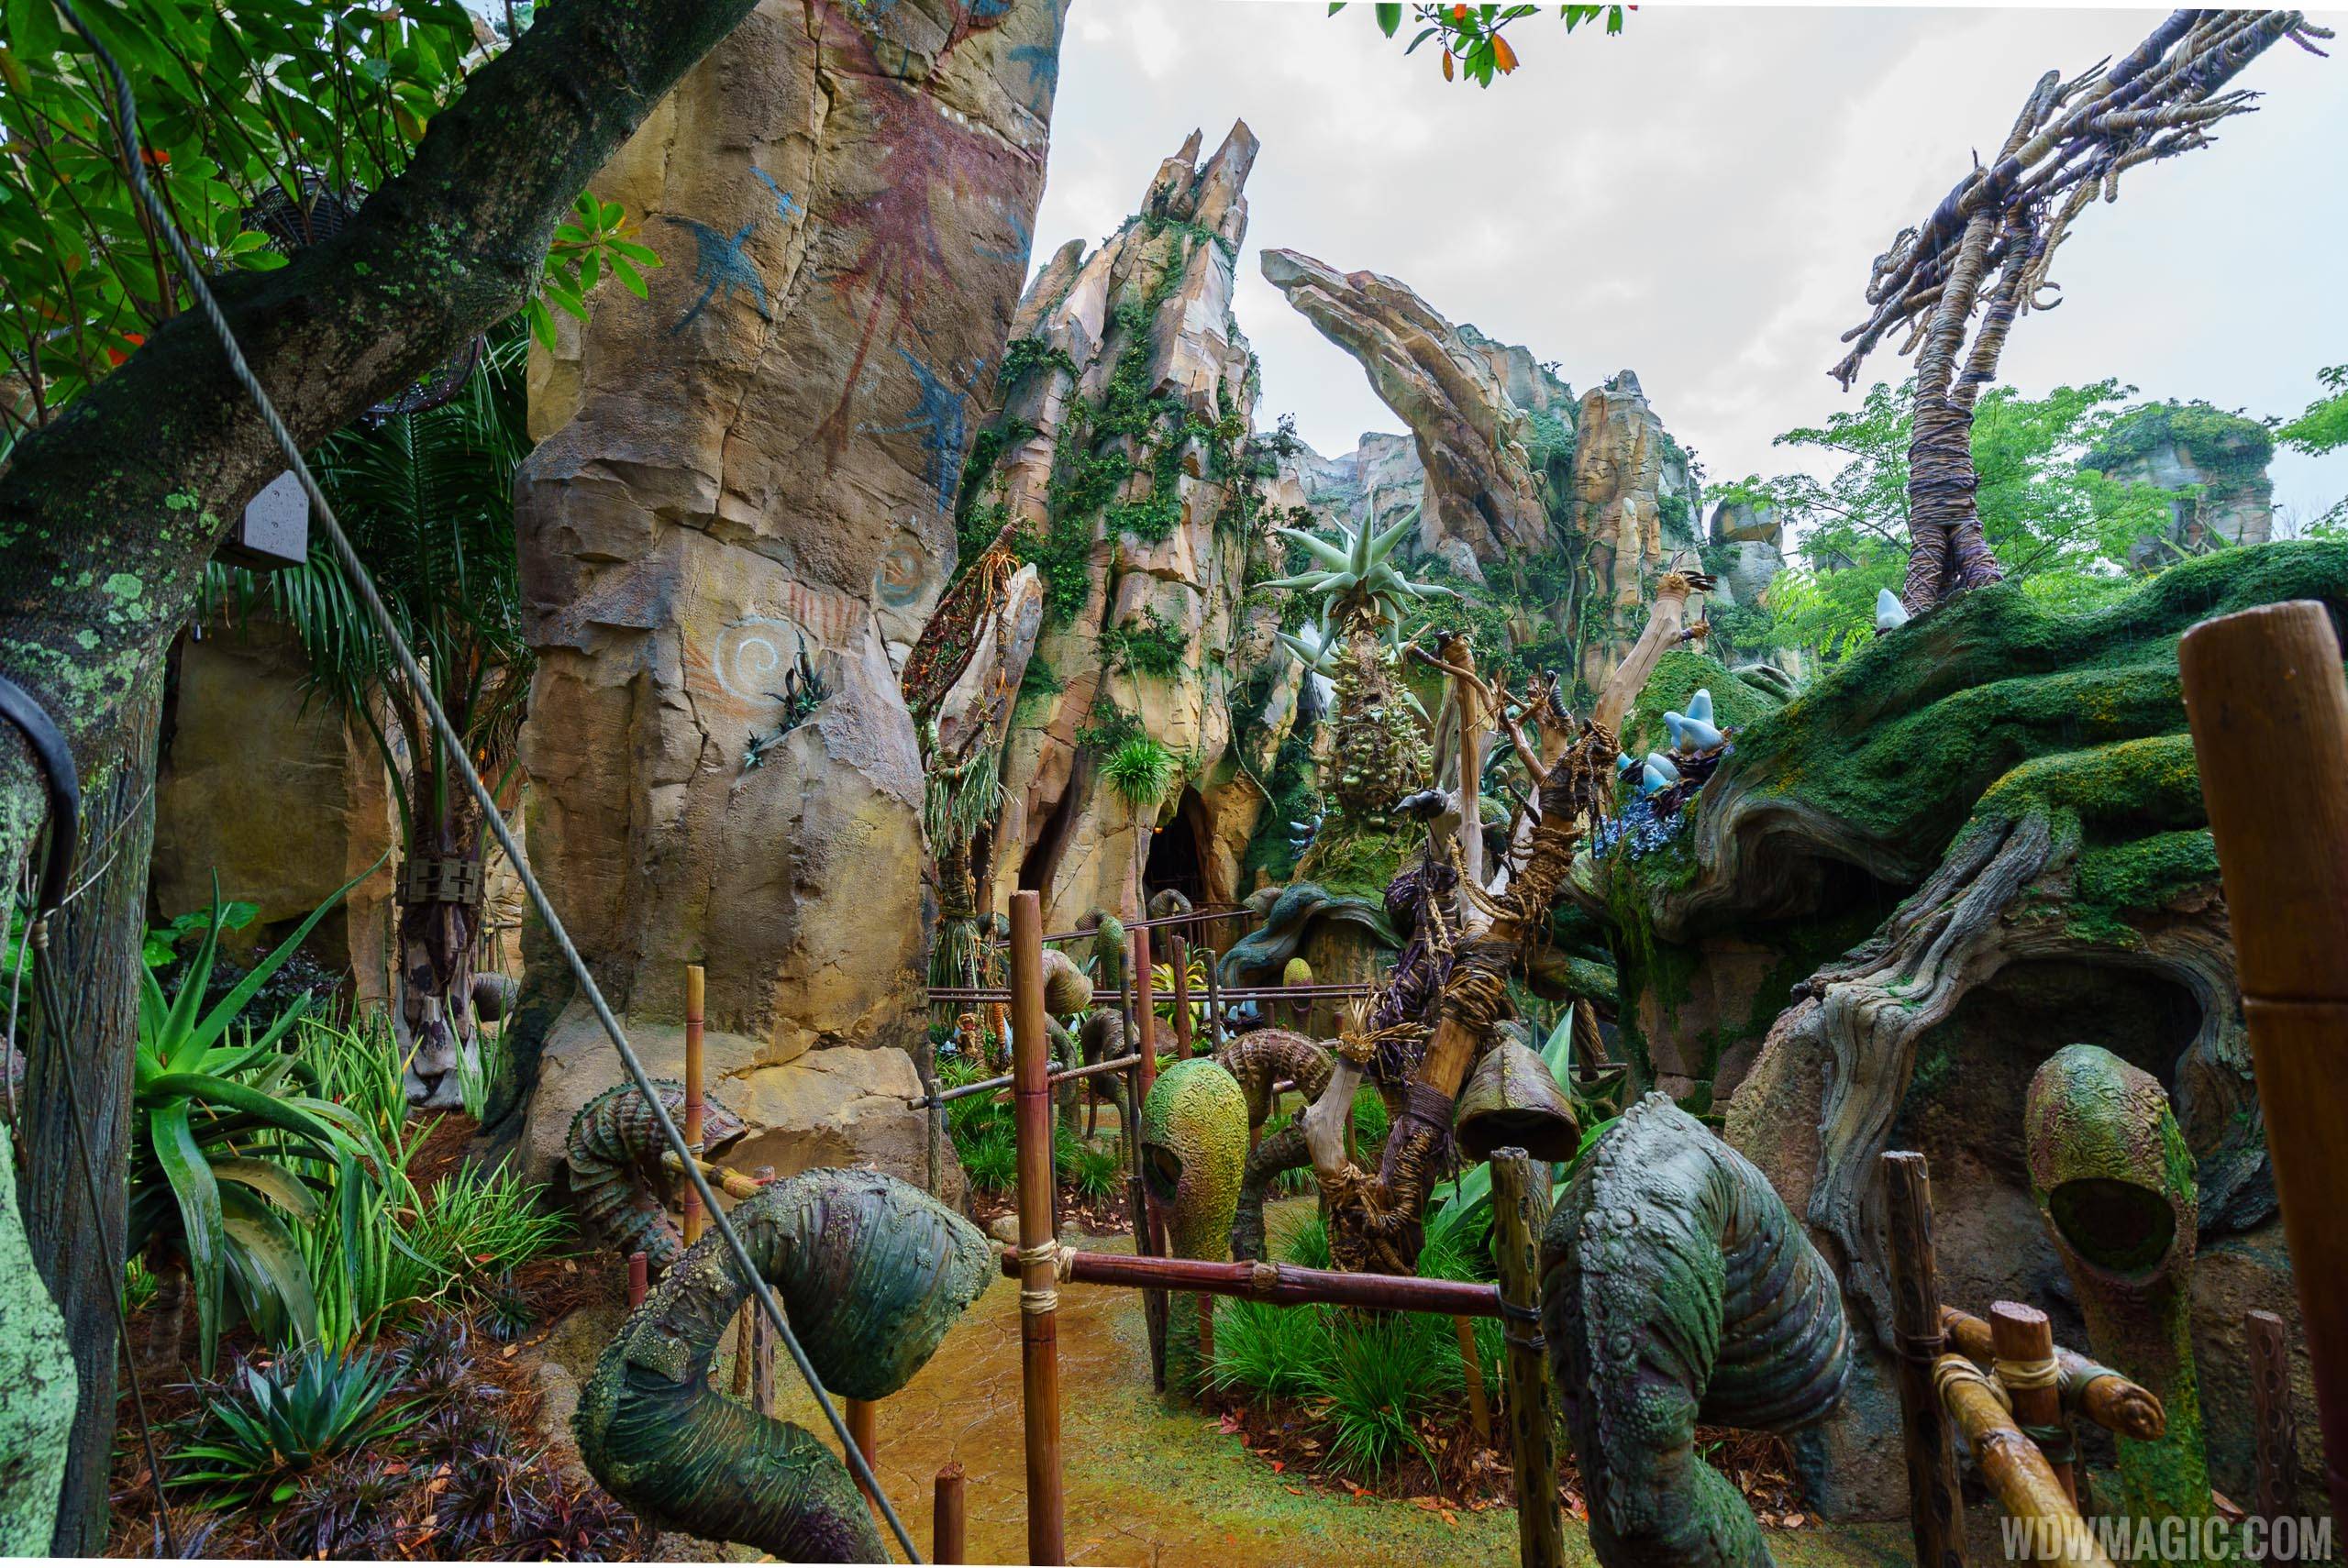 Avatar Flight of Passage outside queue space